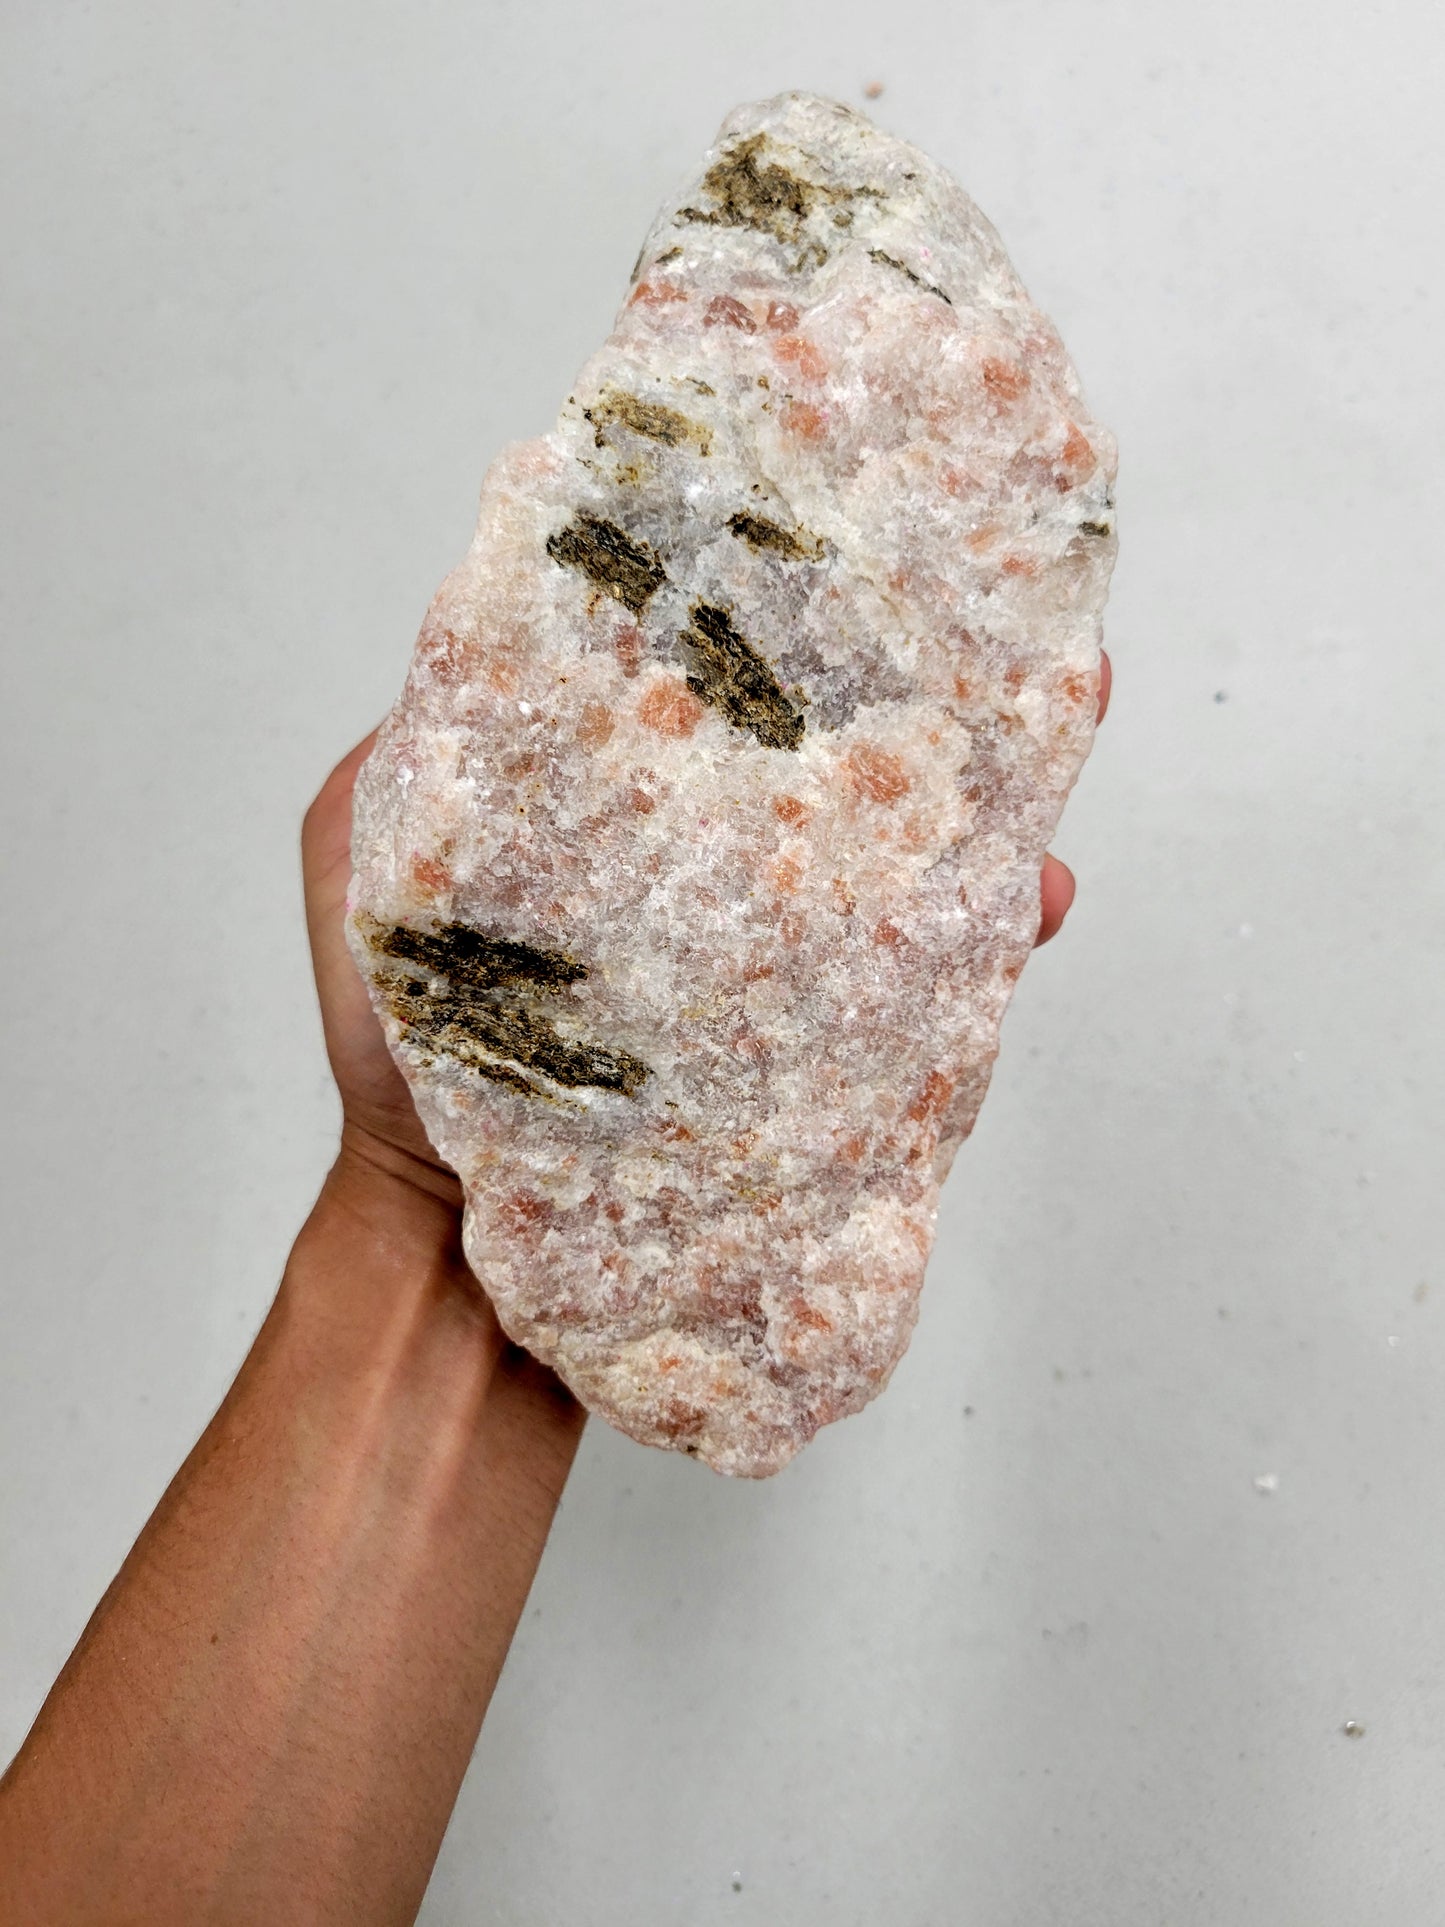 GIANT Raw Sunstone Crystal Specimens from India